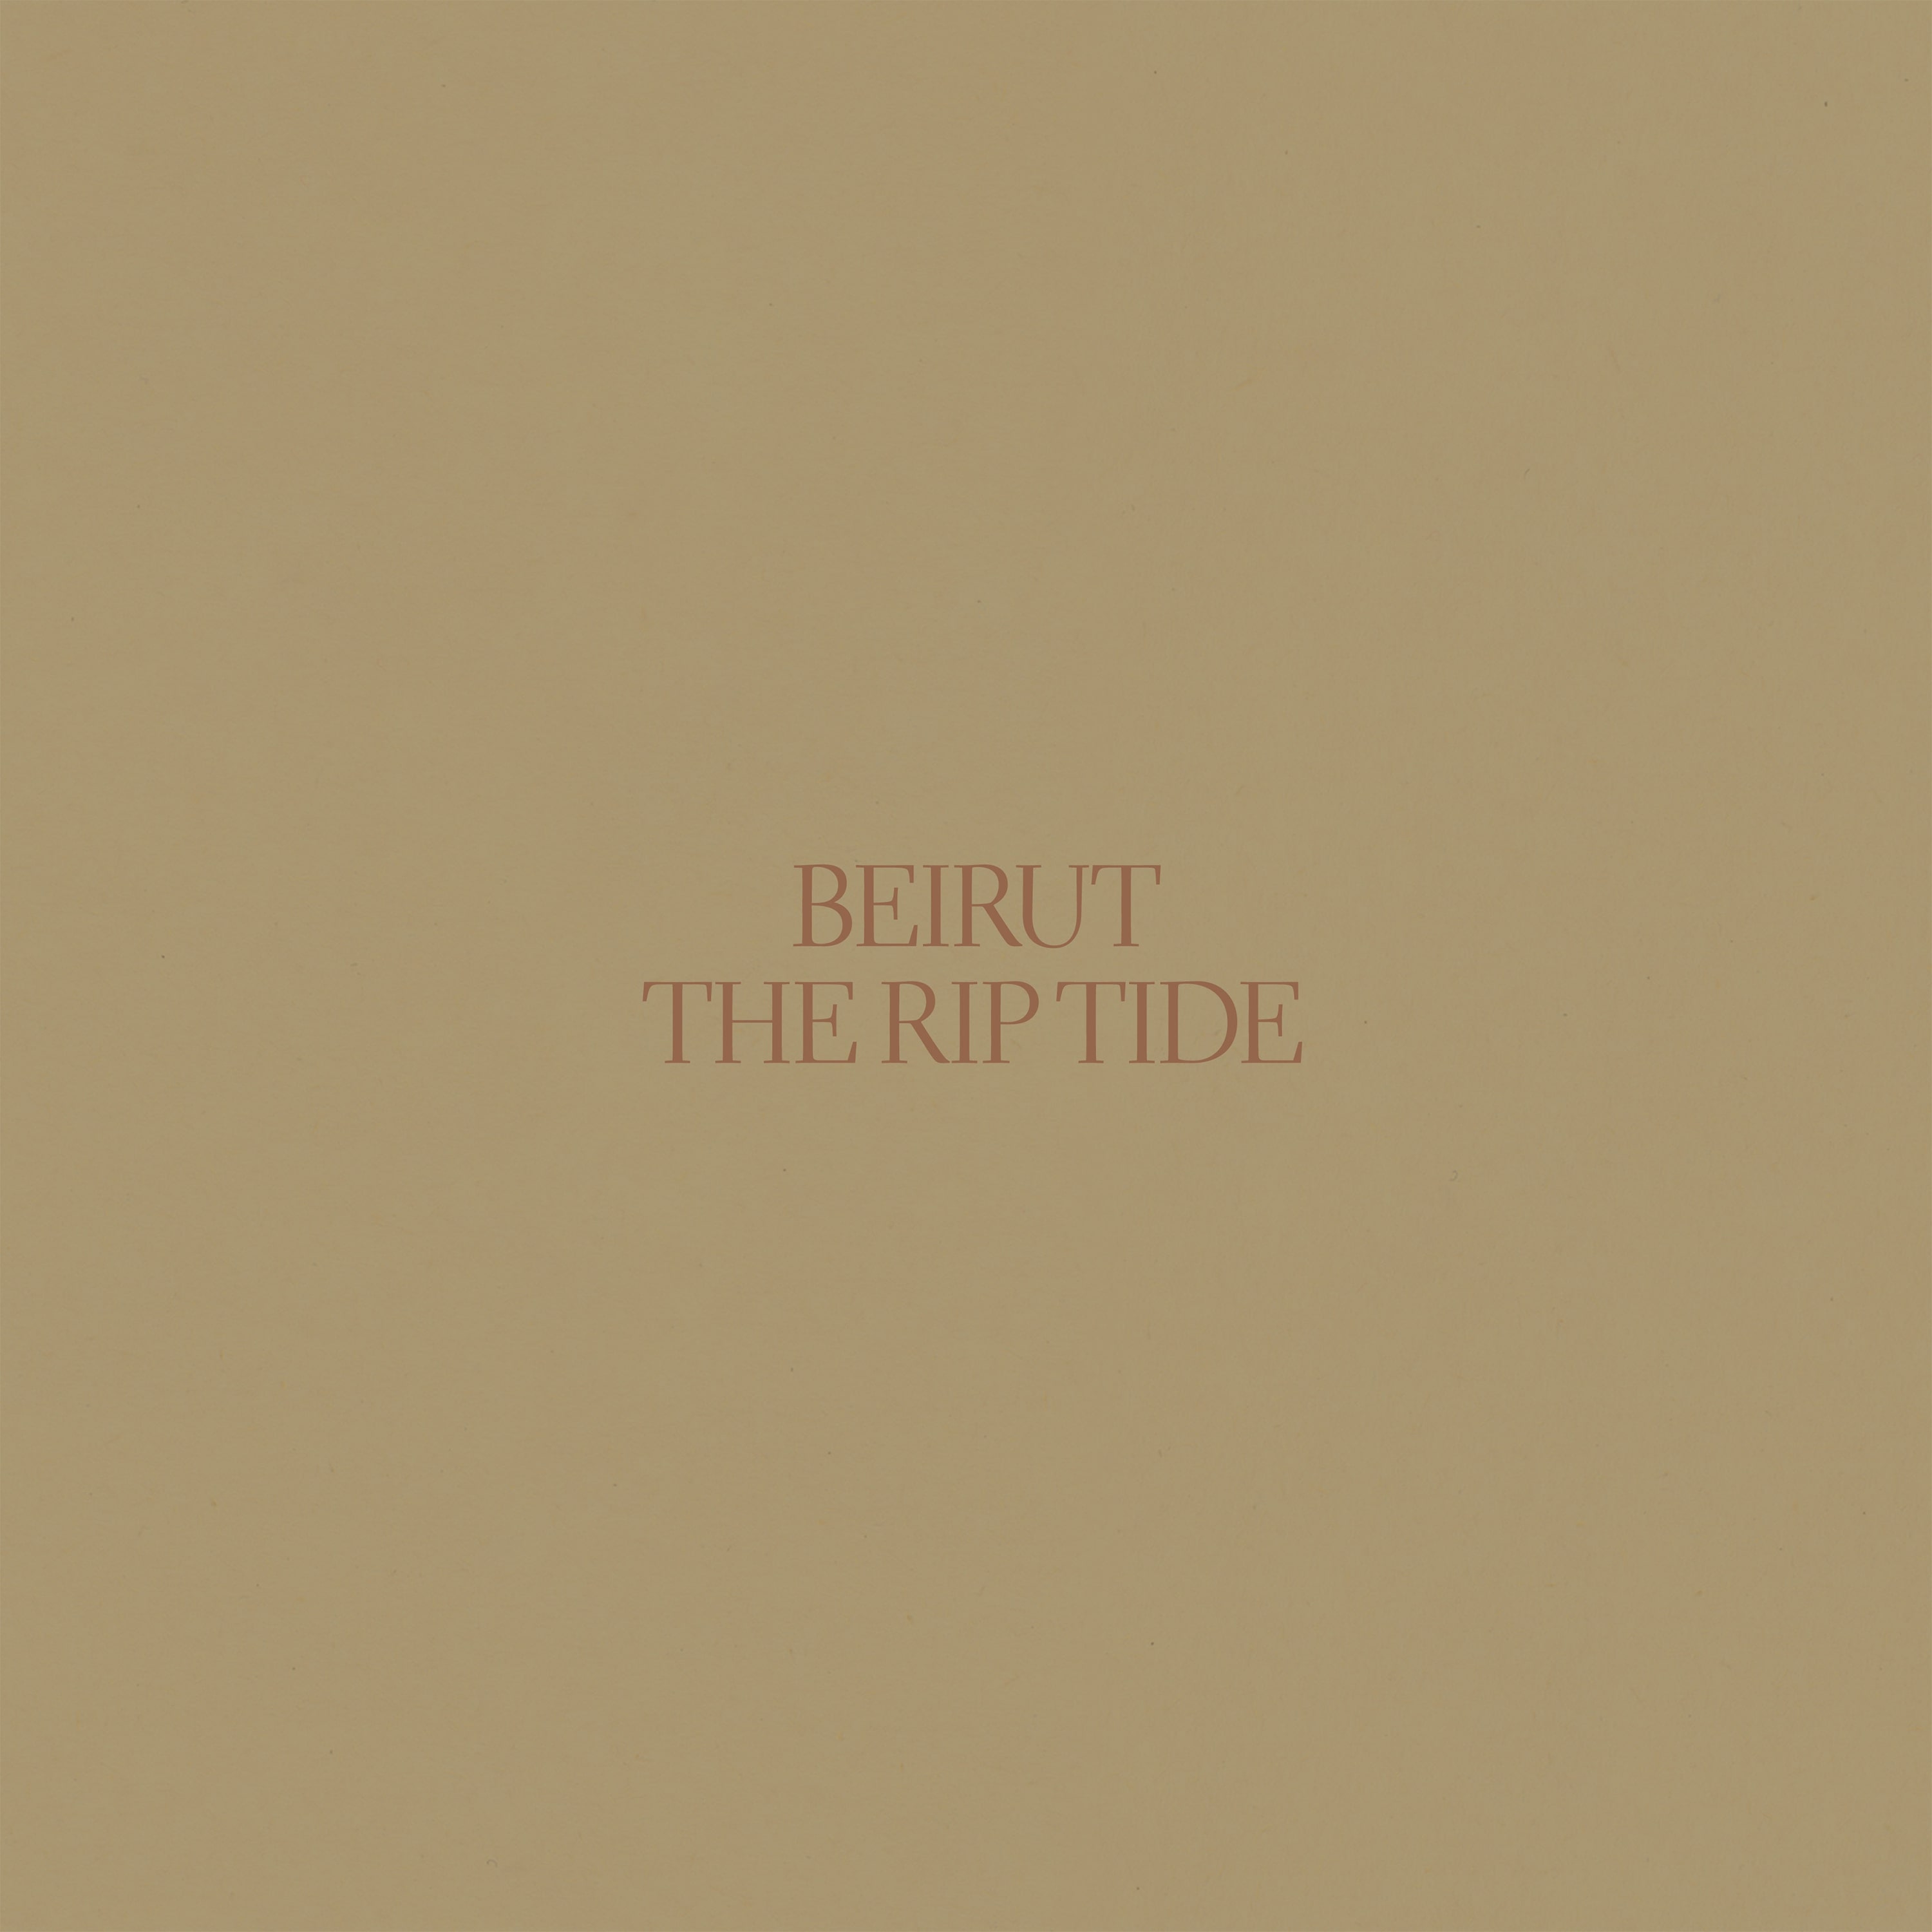 Beirut - The Rip Tide (Re-issue)